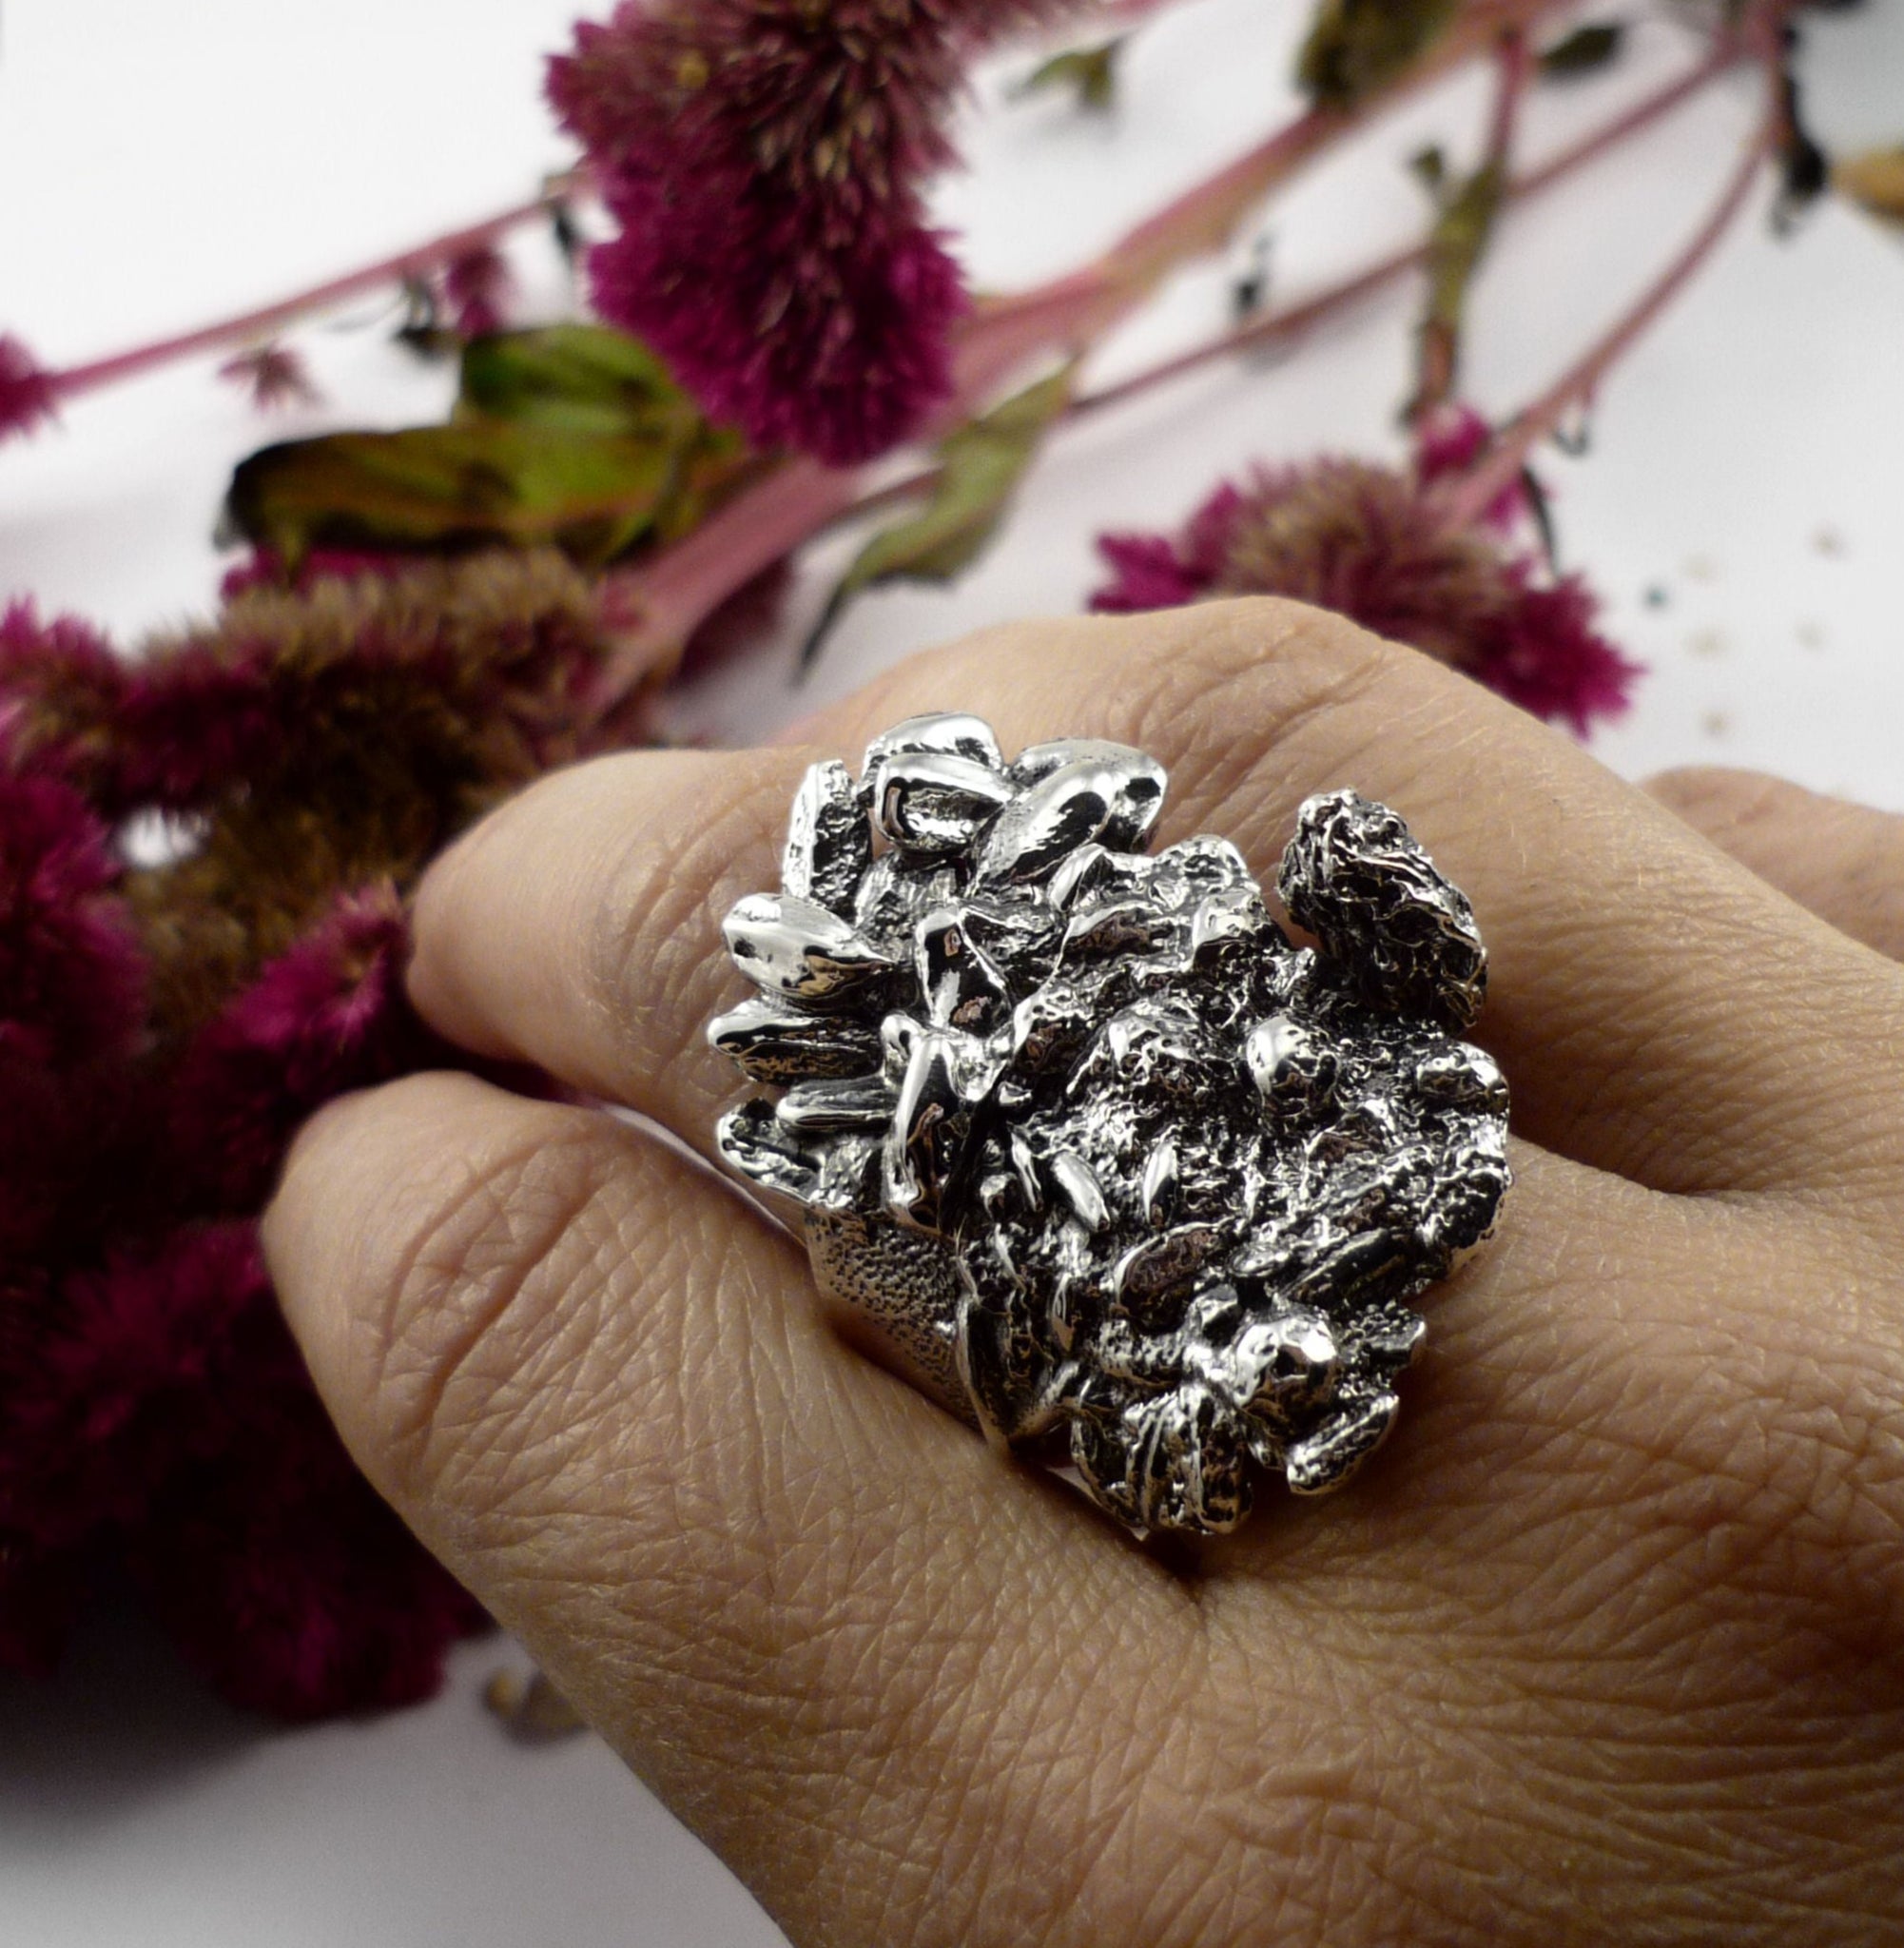 THE VEGAN, sterling silver ring inspired by a veggie pie recipe!